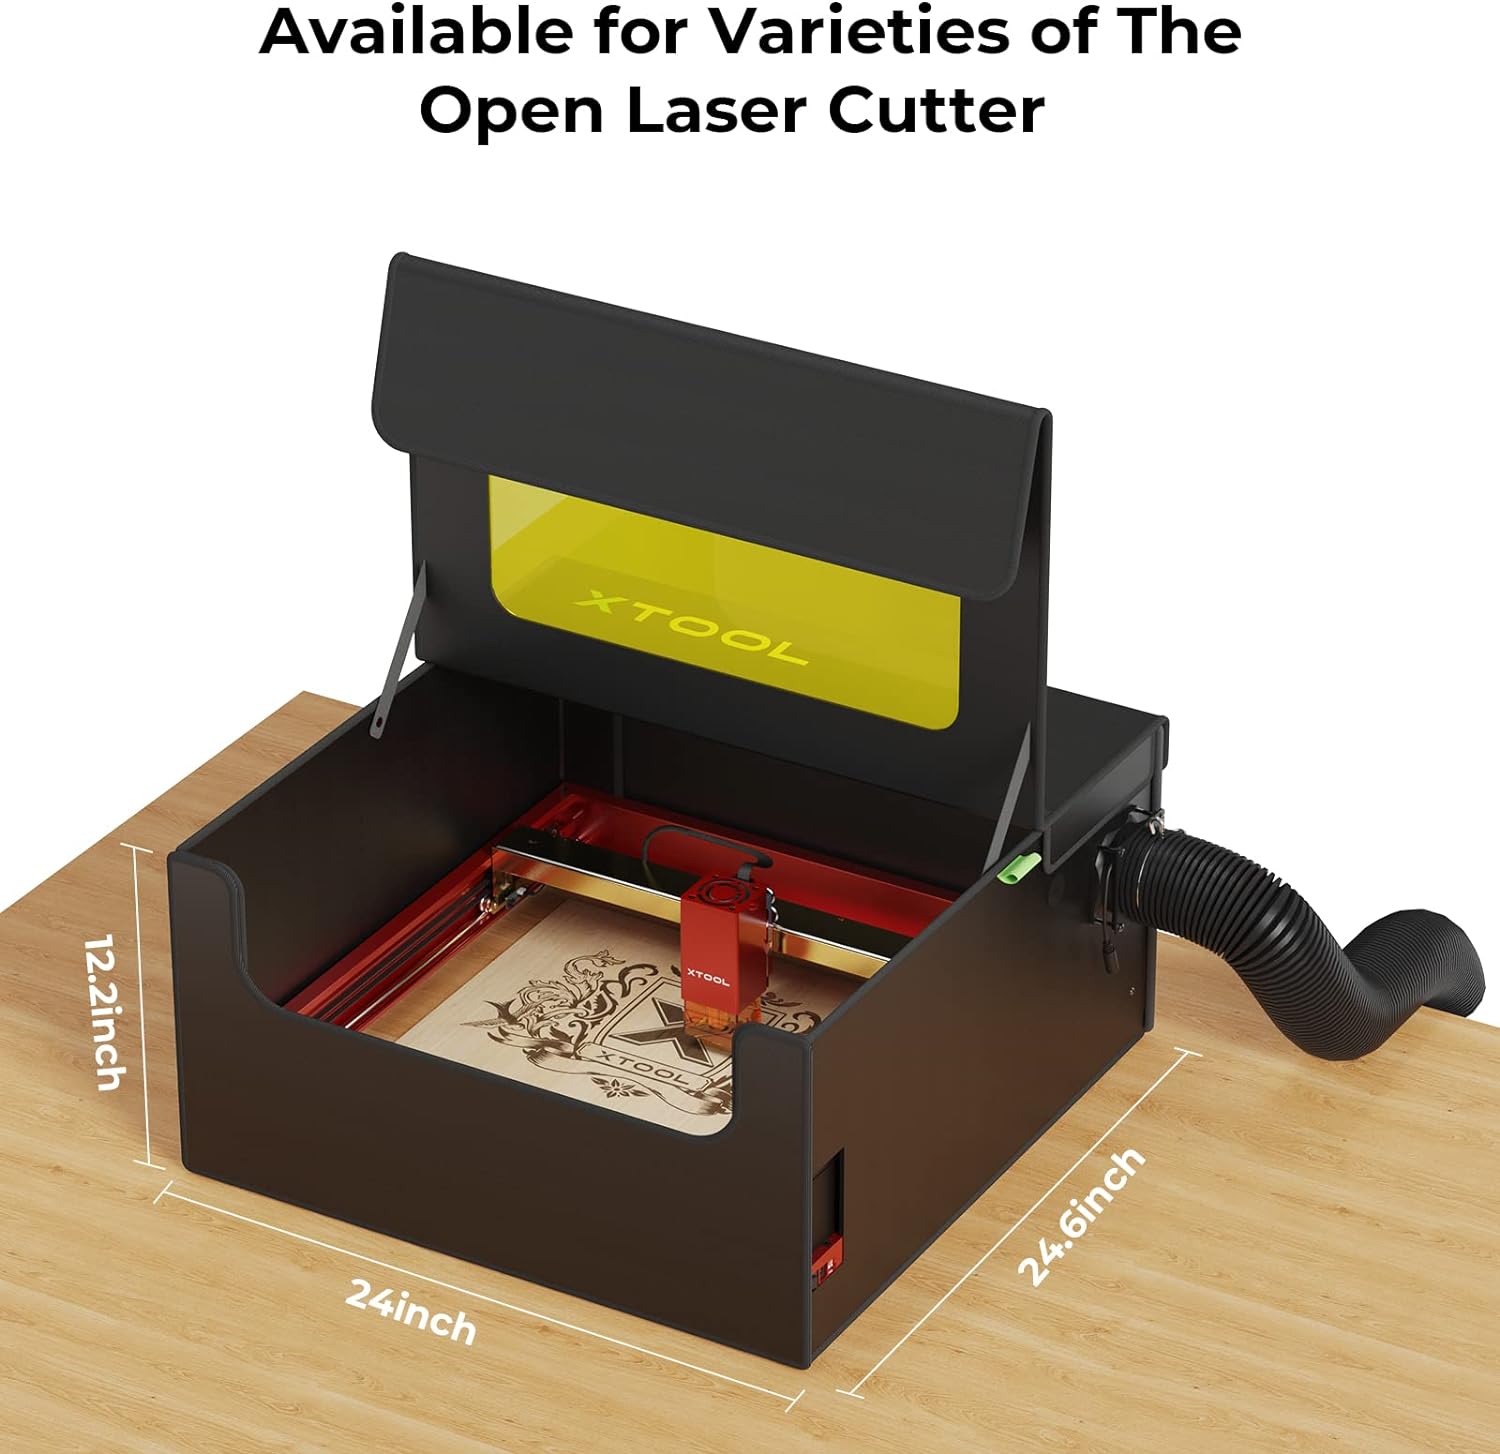 xTool Enclosure Portable Foldable Cover for Laser Engraver